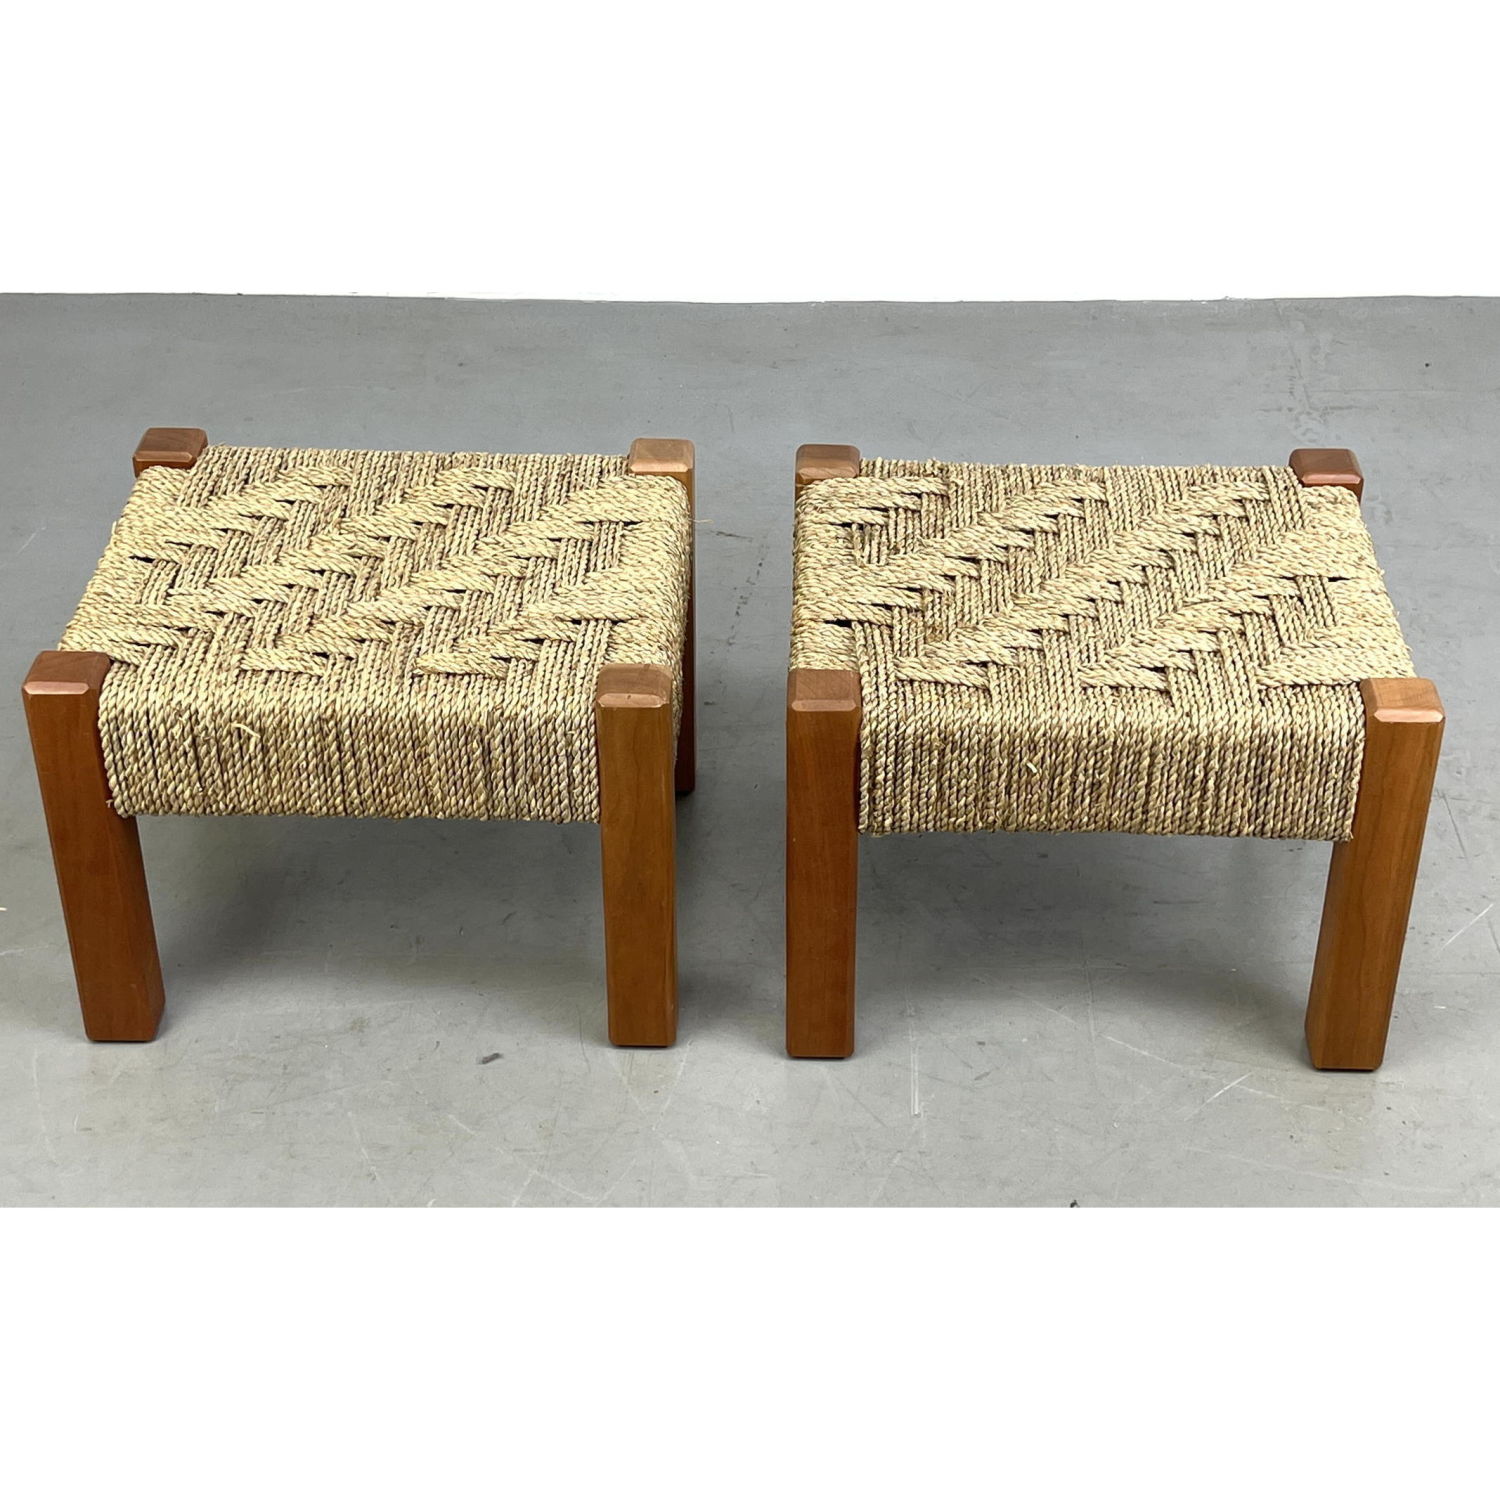 Pair woven Cord Stools. Square